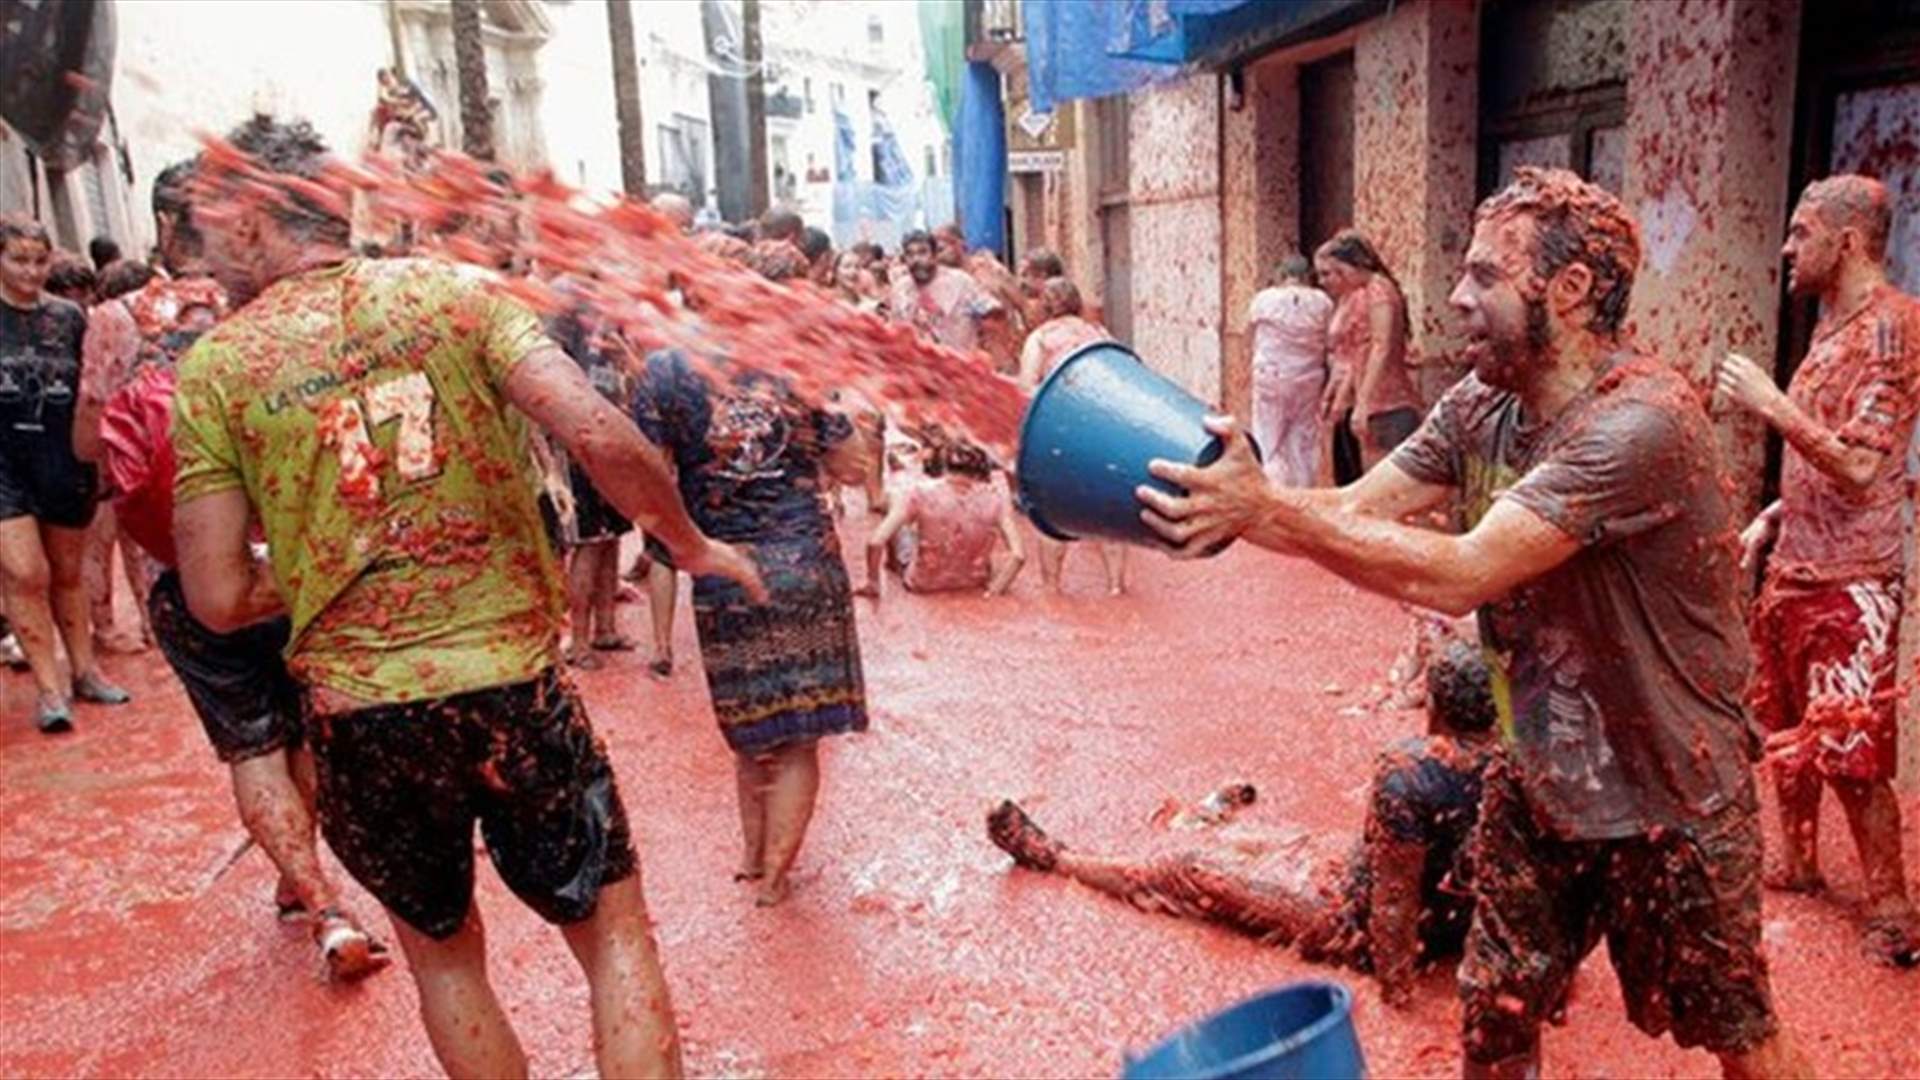 [PHOTOS] Revelers hurl tomatoes in Spanish festival amid higher security